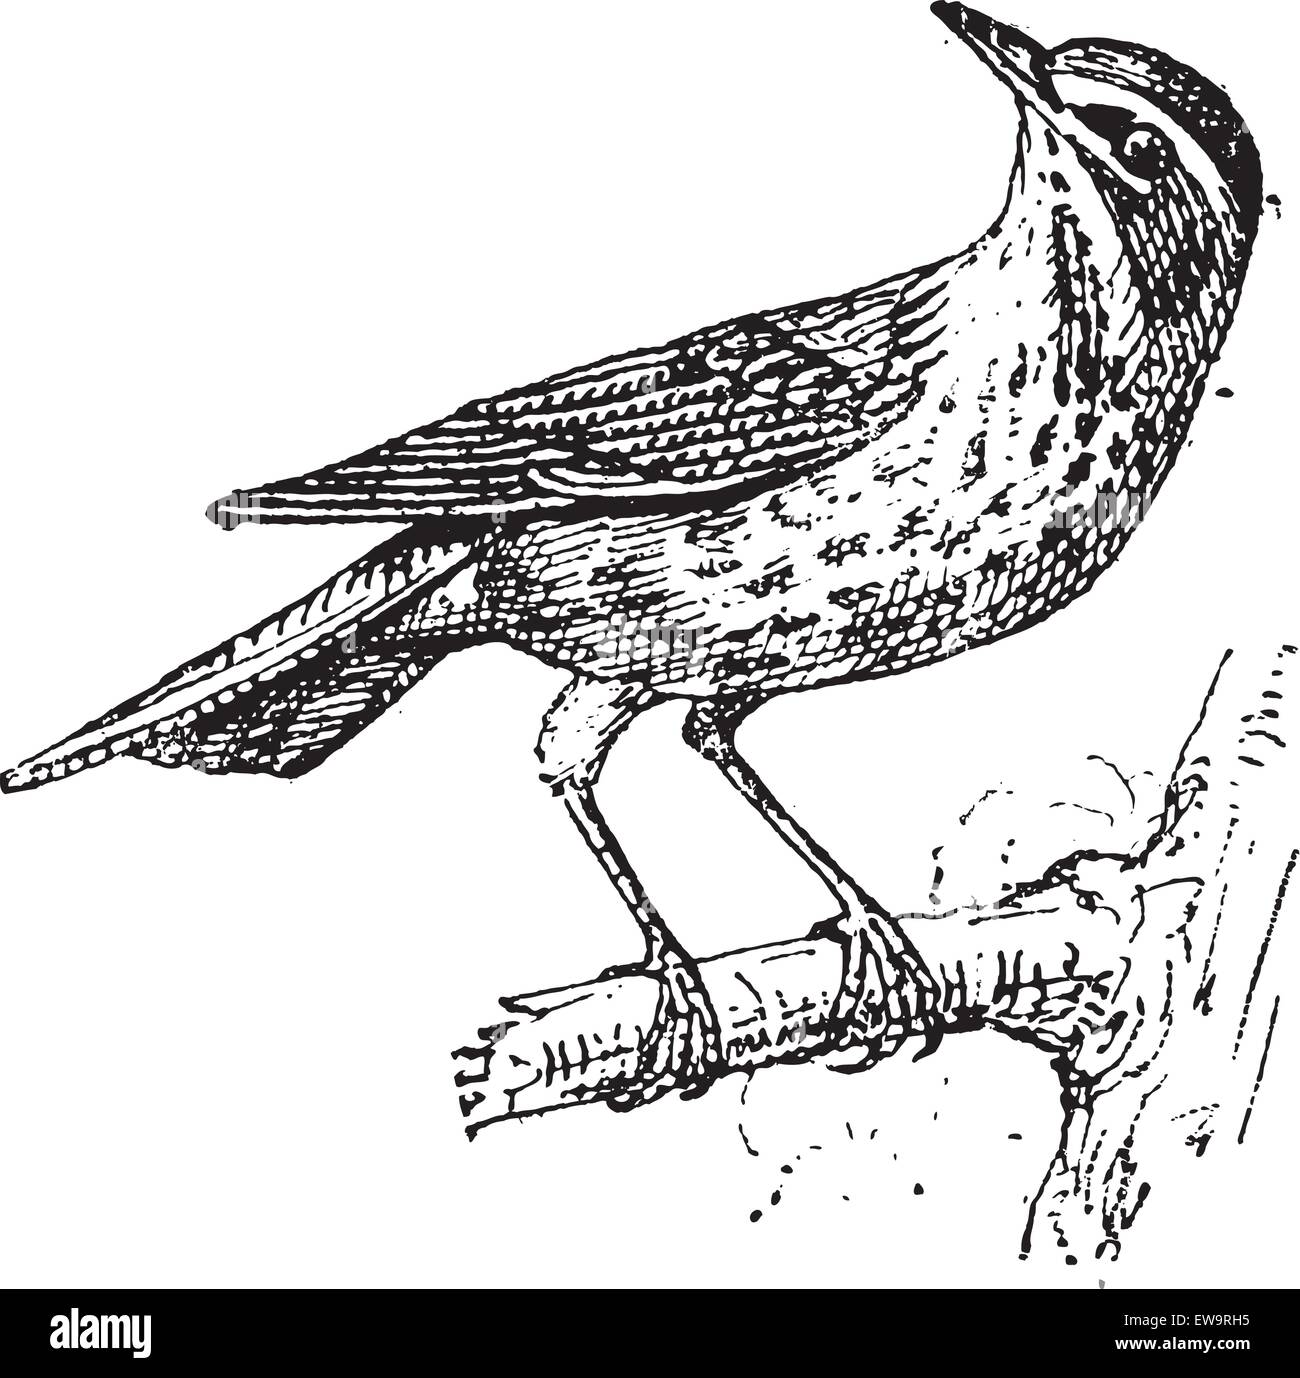 Redwing or Turdus iliacus, Perched on a Branch, vintage engraved illustration. Dictionary of Words and Things - Larive and Fleury - 1895 Stock Vector